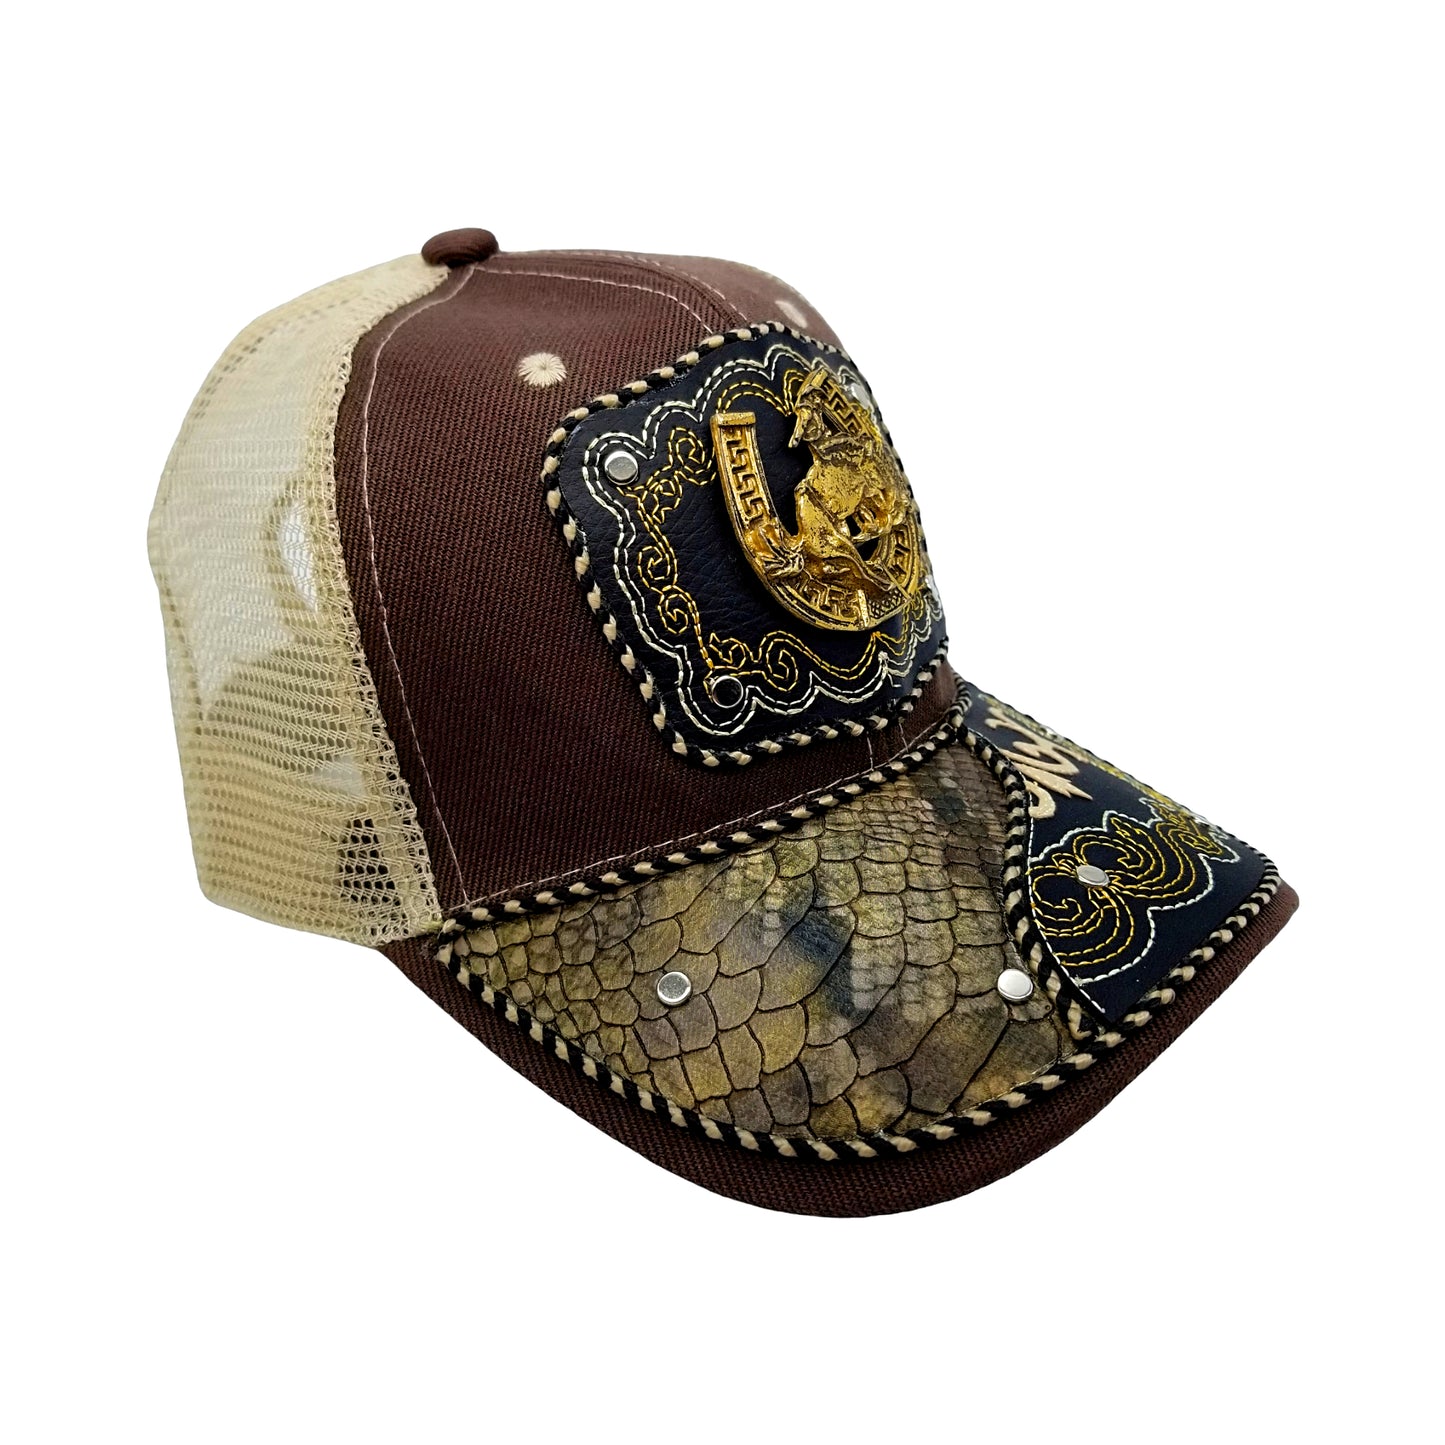 CASQUETTE - COUNTRY URBAIN - 3 - COWBOY RODEO CHEVAL - TERRA ET BLANCHE